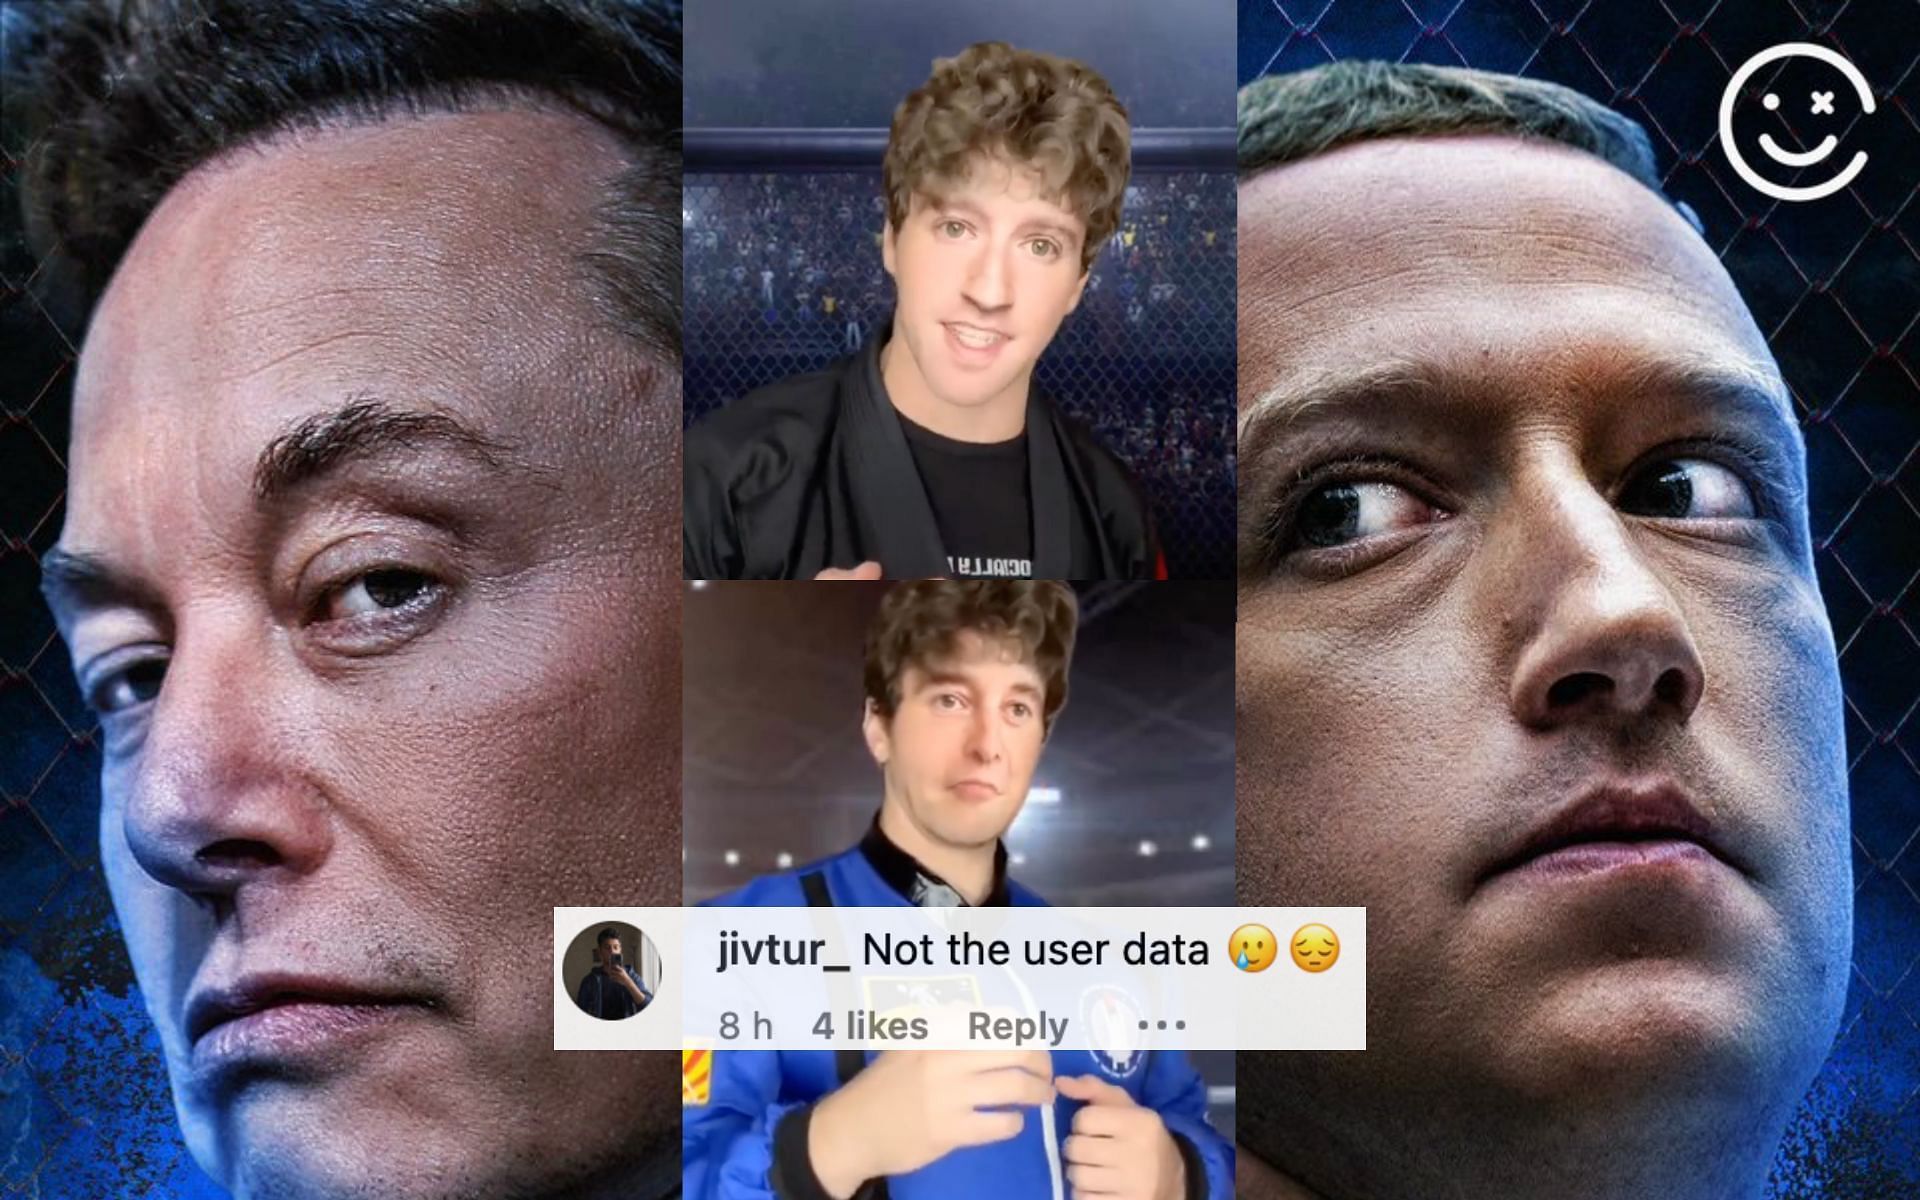 Elon Musk vs. Mark Zuckerberg (background) and the reenactment by Austin Nasso (insets). [Images courtesy: background via Twitter @MarioNawfal and insets via Instagram @austinnasso]